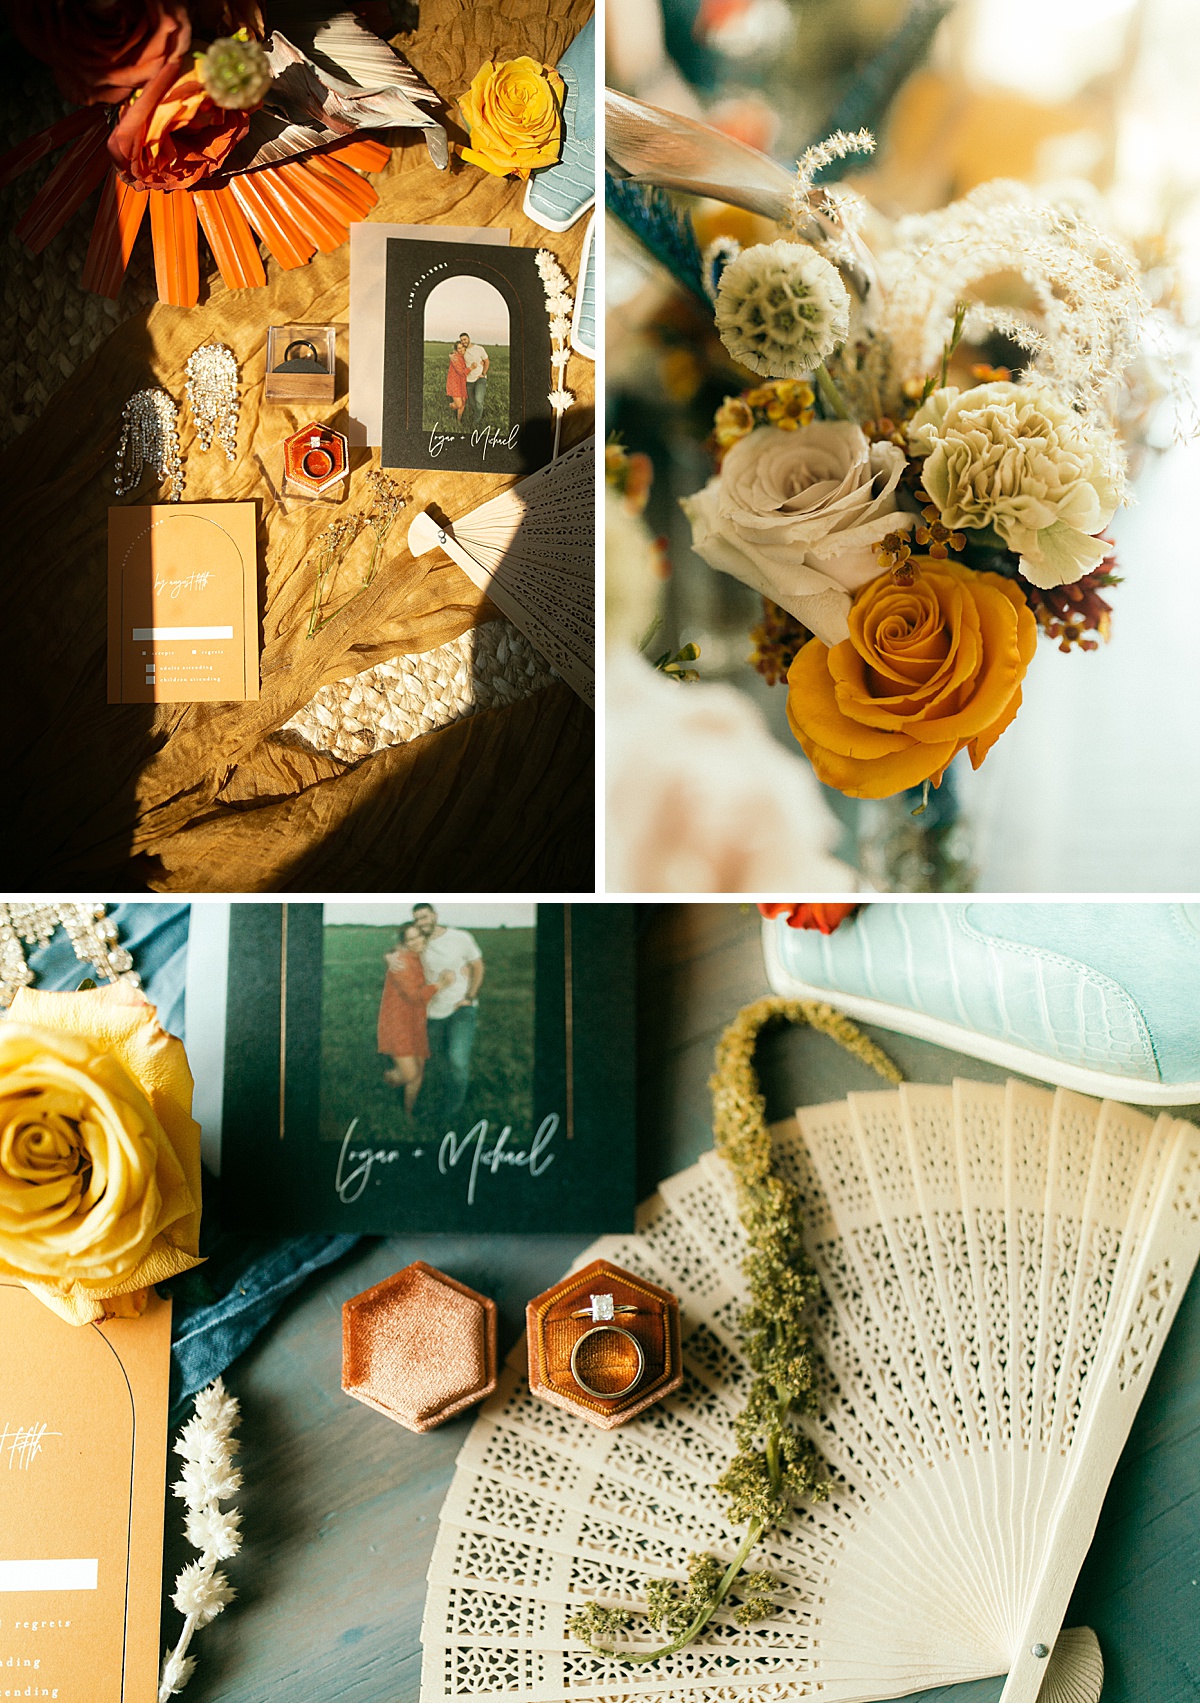 Orange, blue and yellow wedding detail flat lay with invitations, wedding rings and flowers.